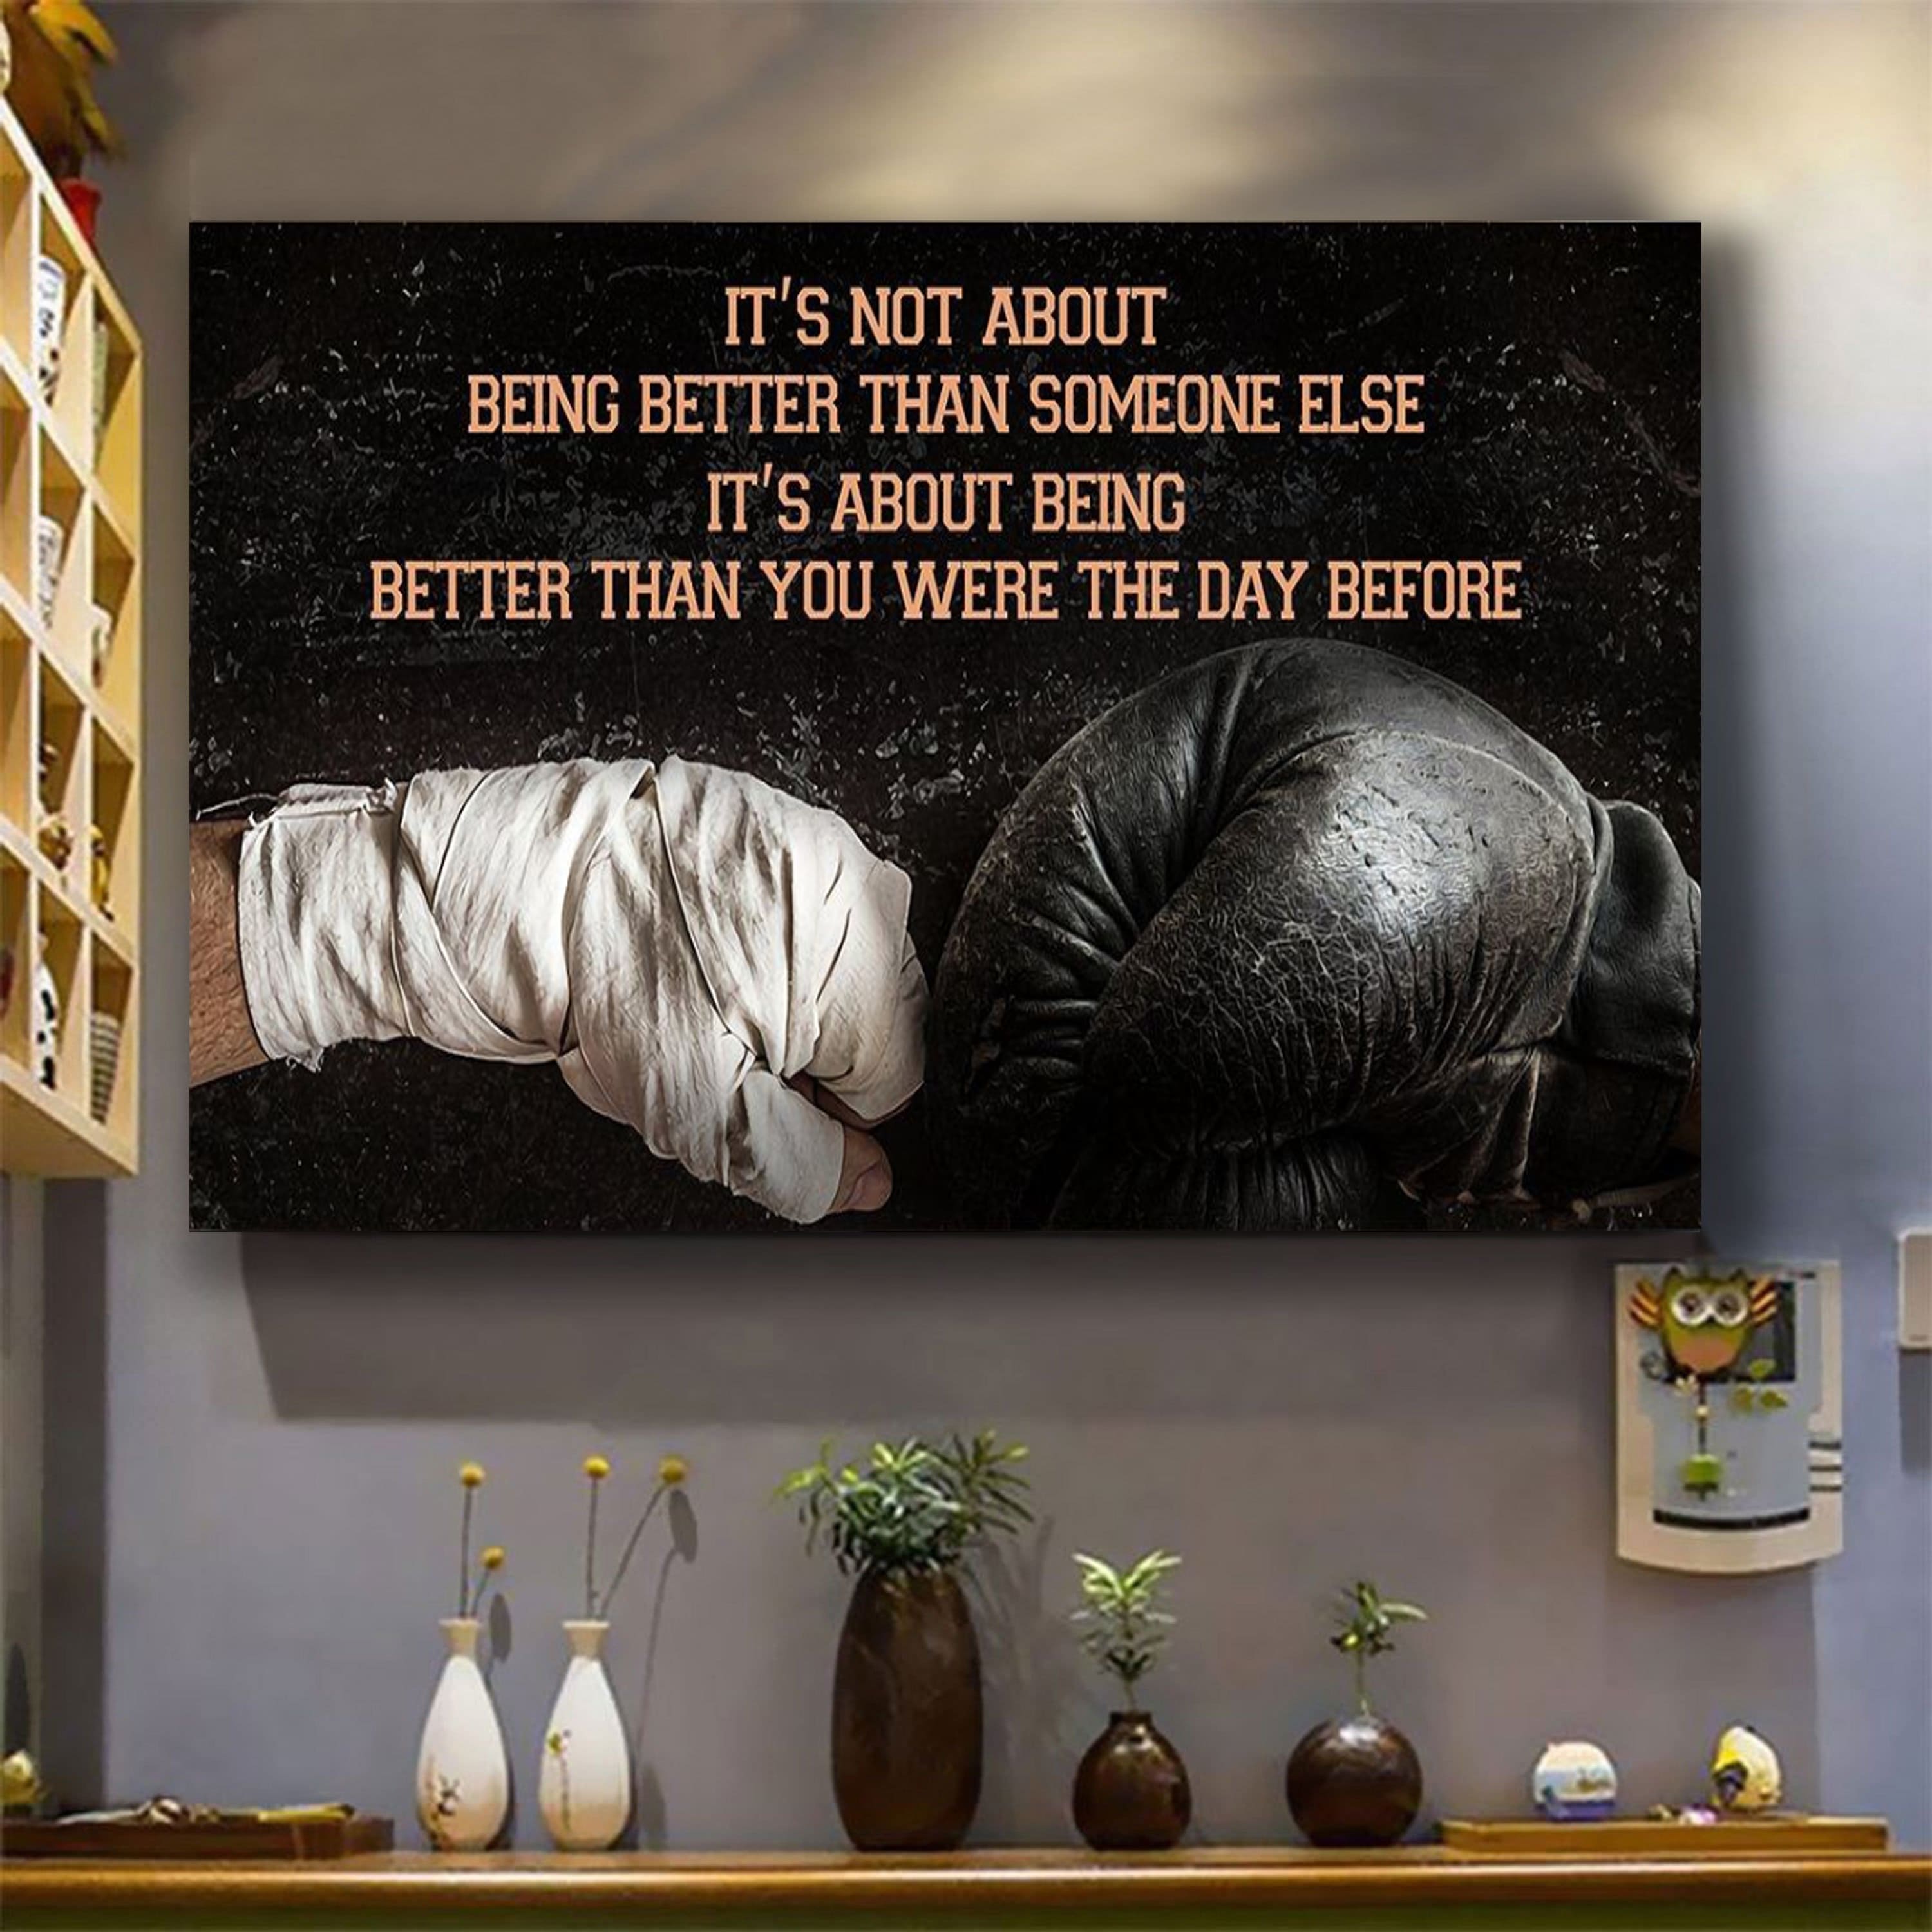 Softball customizable poster canvas - It is not about better than someone else, It is about being better than you were the day before